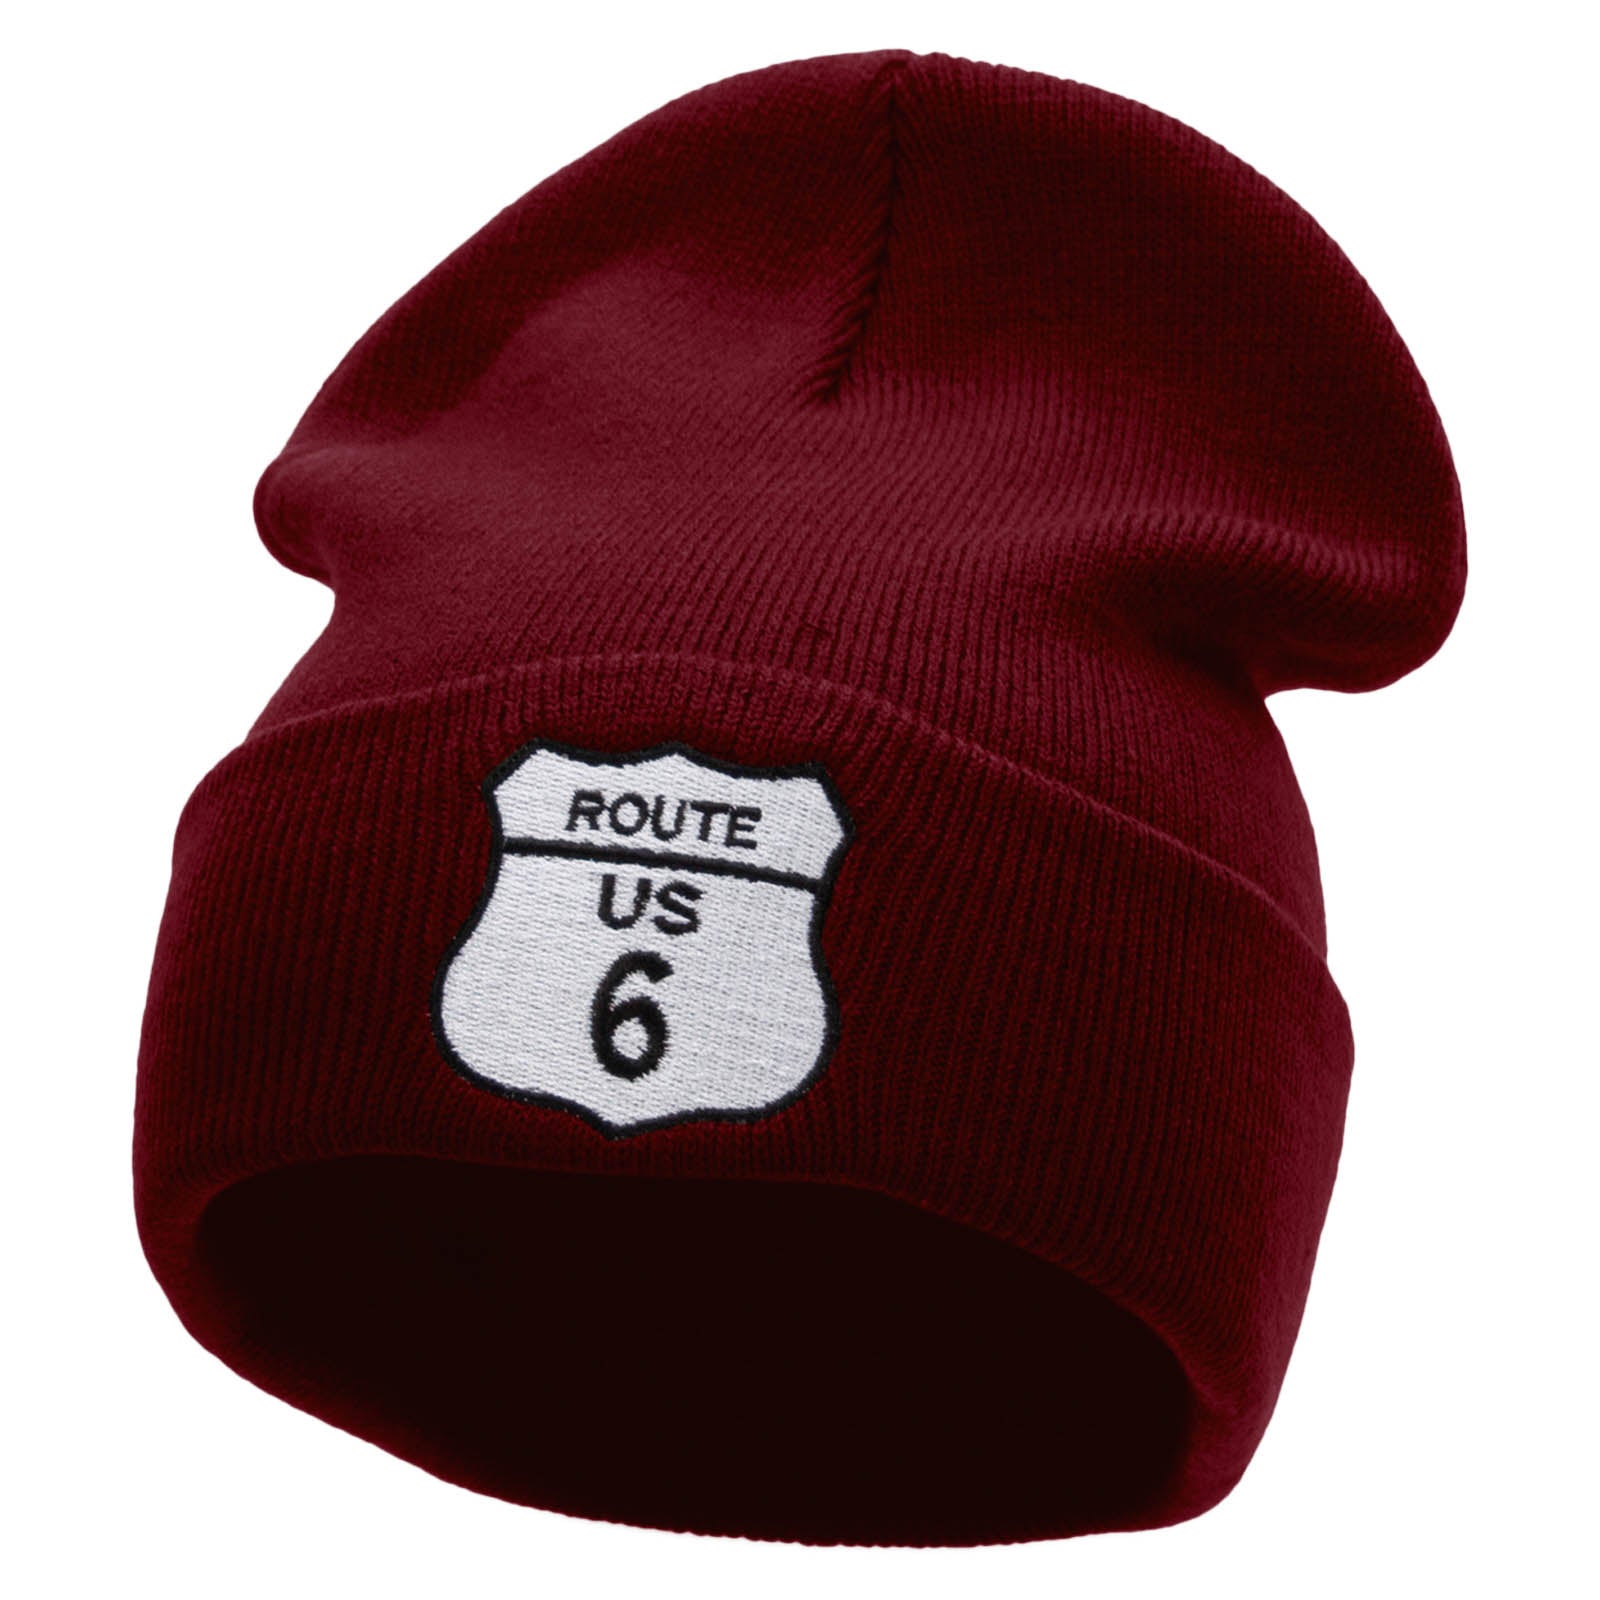 Route US 6 Embroidered 12 Inch Long Knitted Beanie - Maroon OSFM